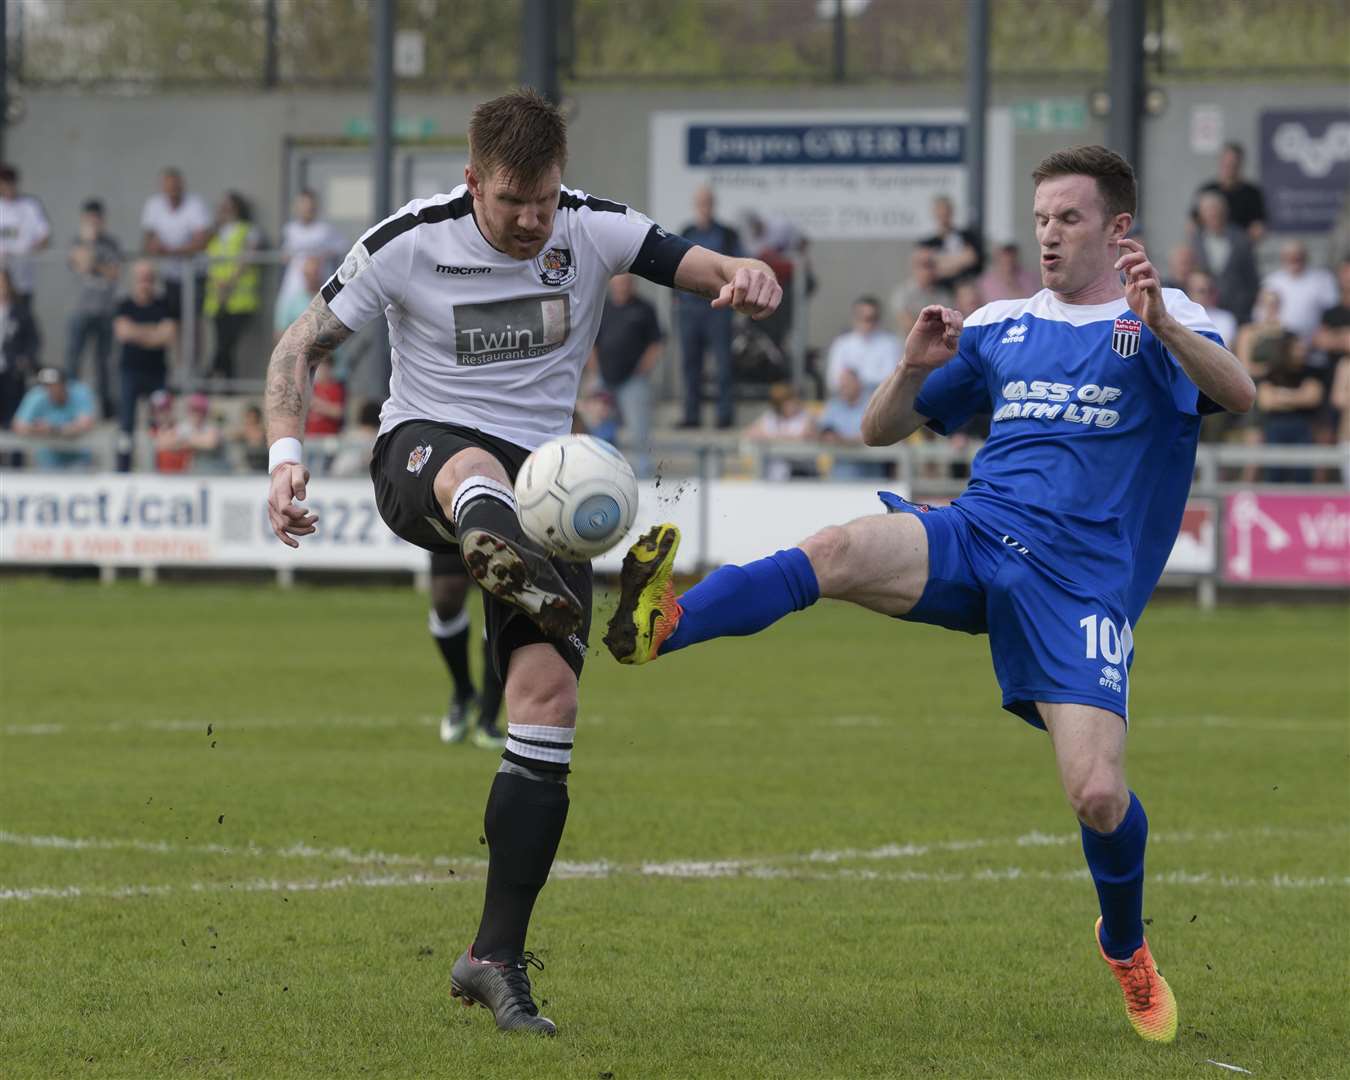 Dartford captain Elliot Bradbrook is challenged by Bath's Andy Watkins. Picture: Andy Payton